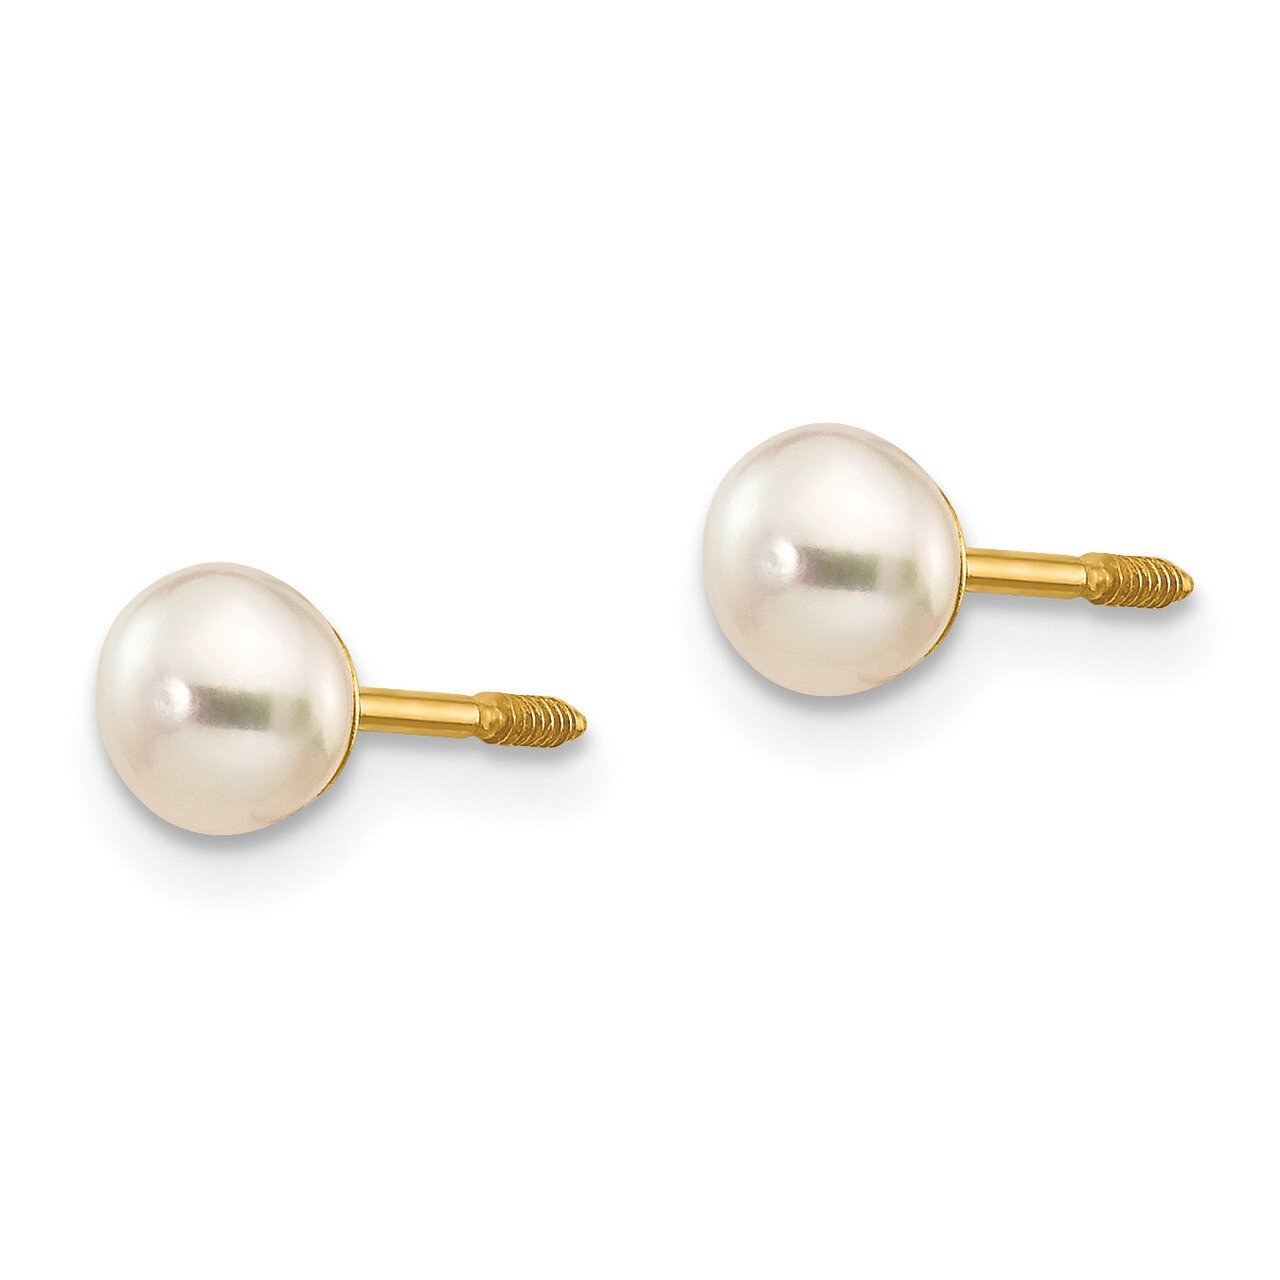 4.5mm Button Fresh Water Cultured Pearl Earrings - 14k Gold GK415